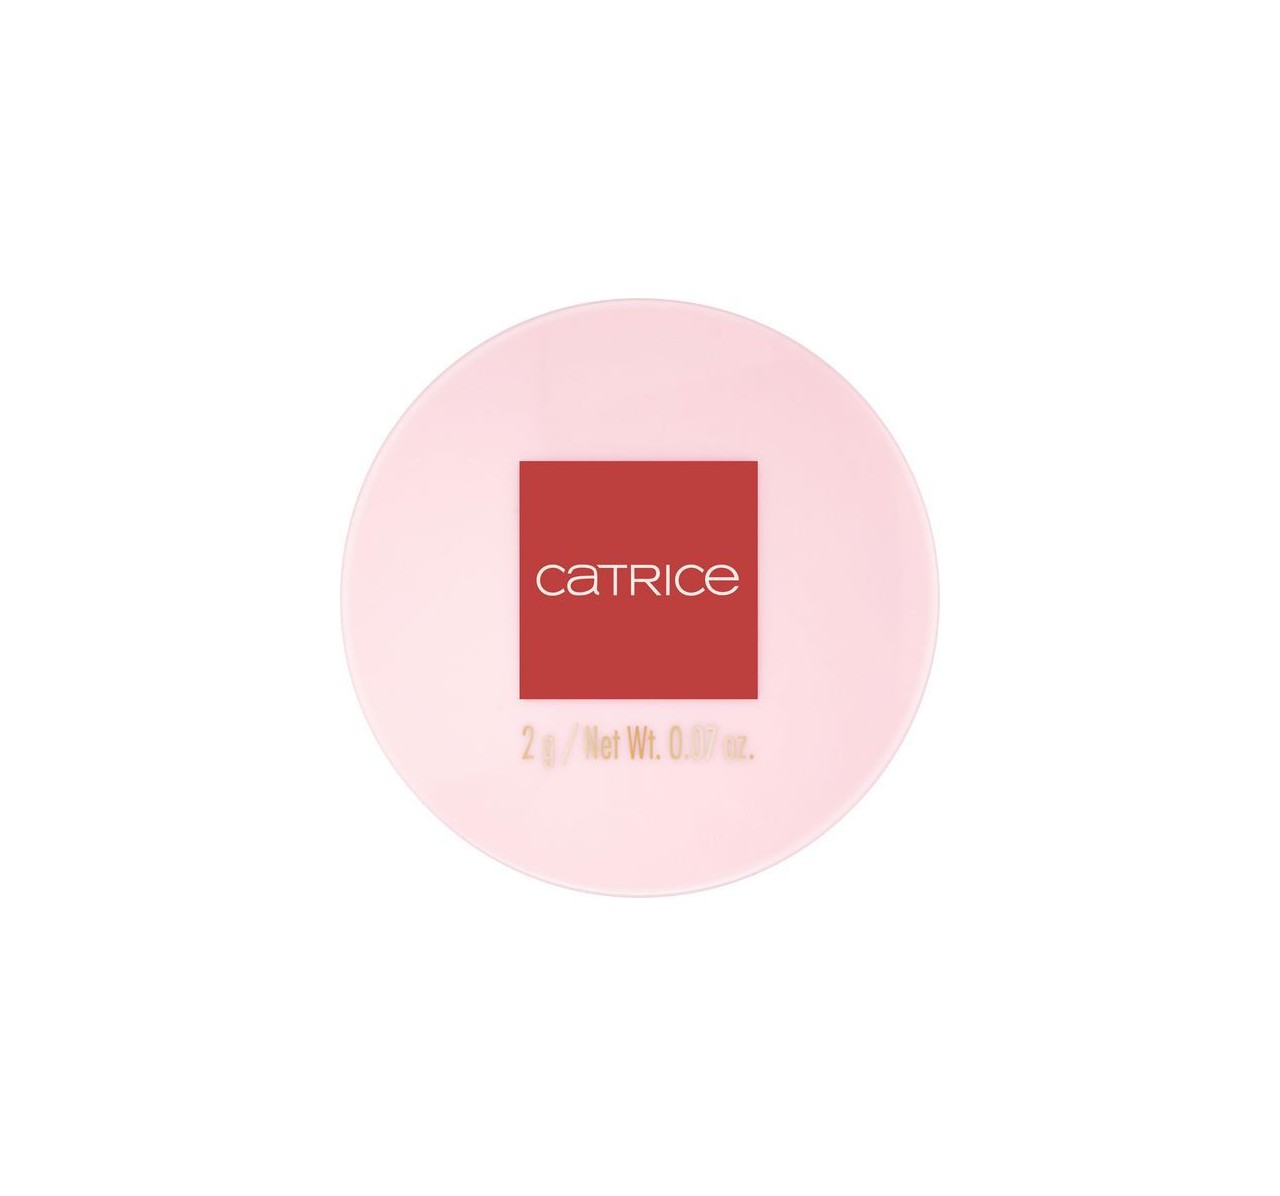 Catrice Limited Cream-To-Powder Edition C02 Blush Beautiful.You